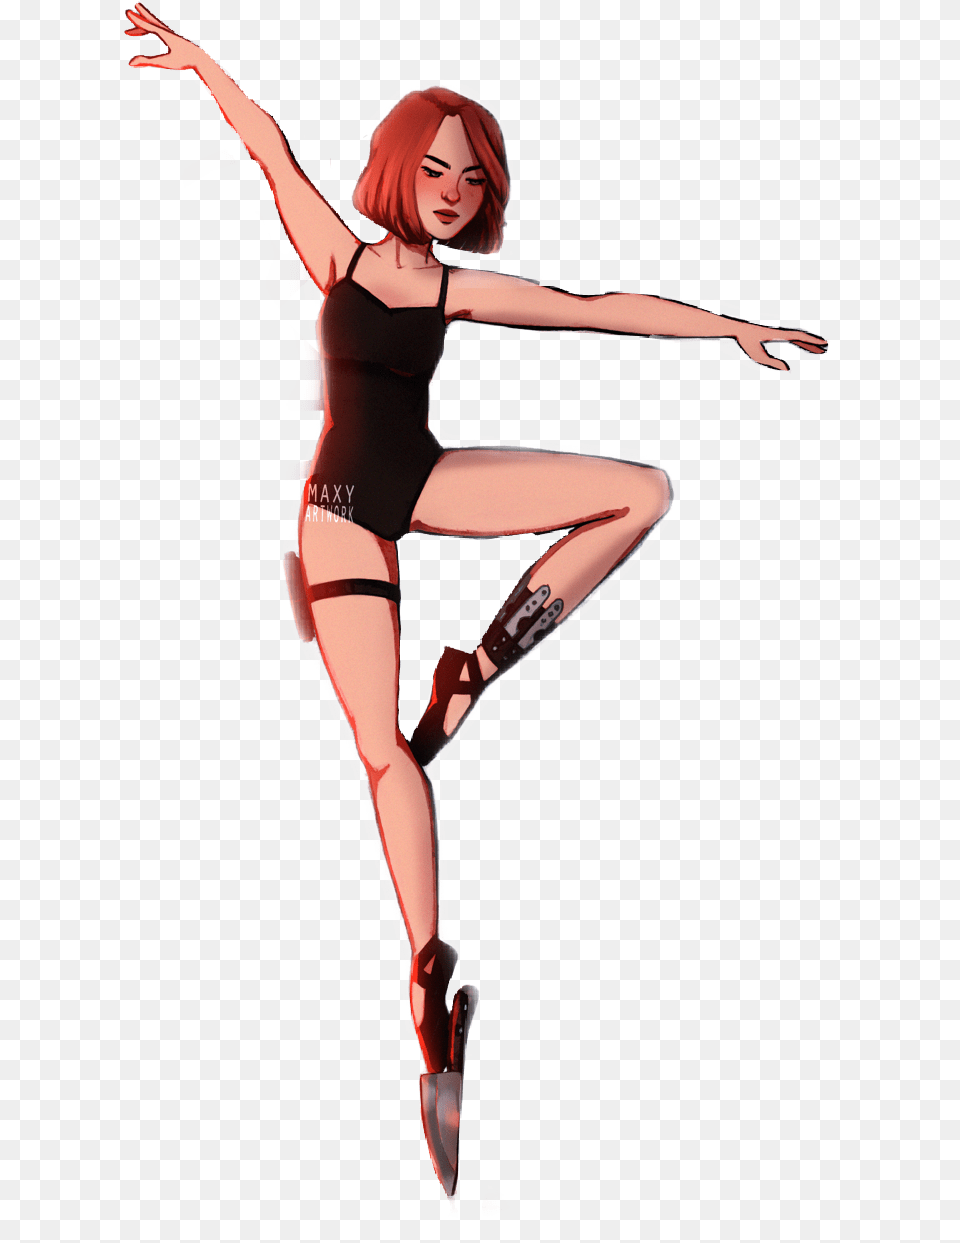 I Do Not Claim This Artwork As My Own If You Would Natasha Romanoff Fan Art, Adult, Dancing, Female, Leisure Activities Free Transparent Png